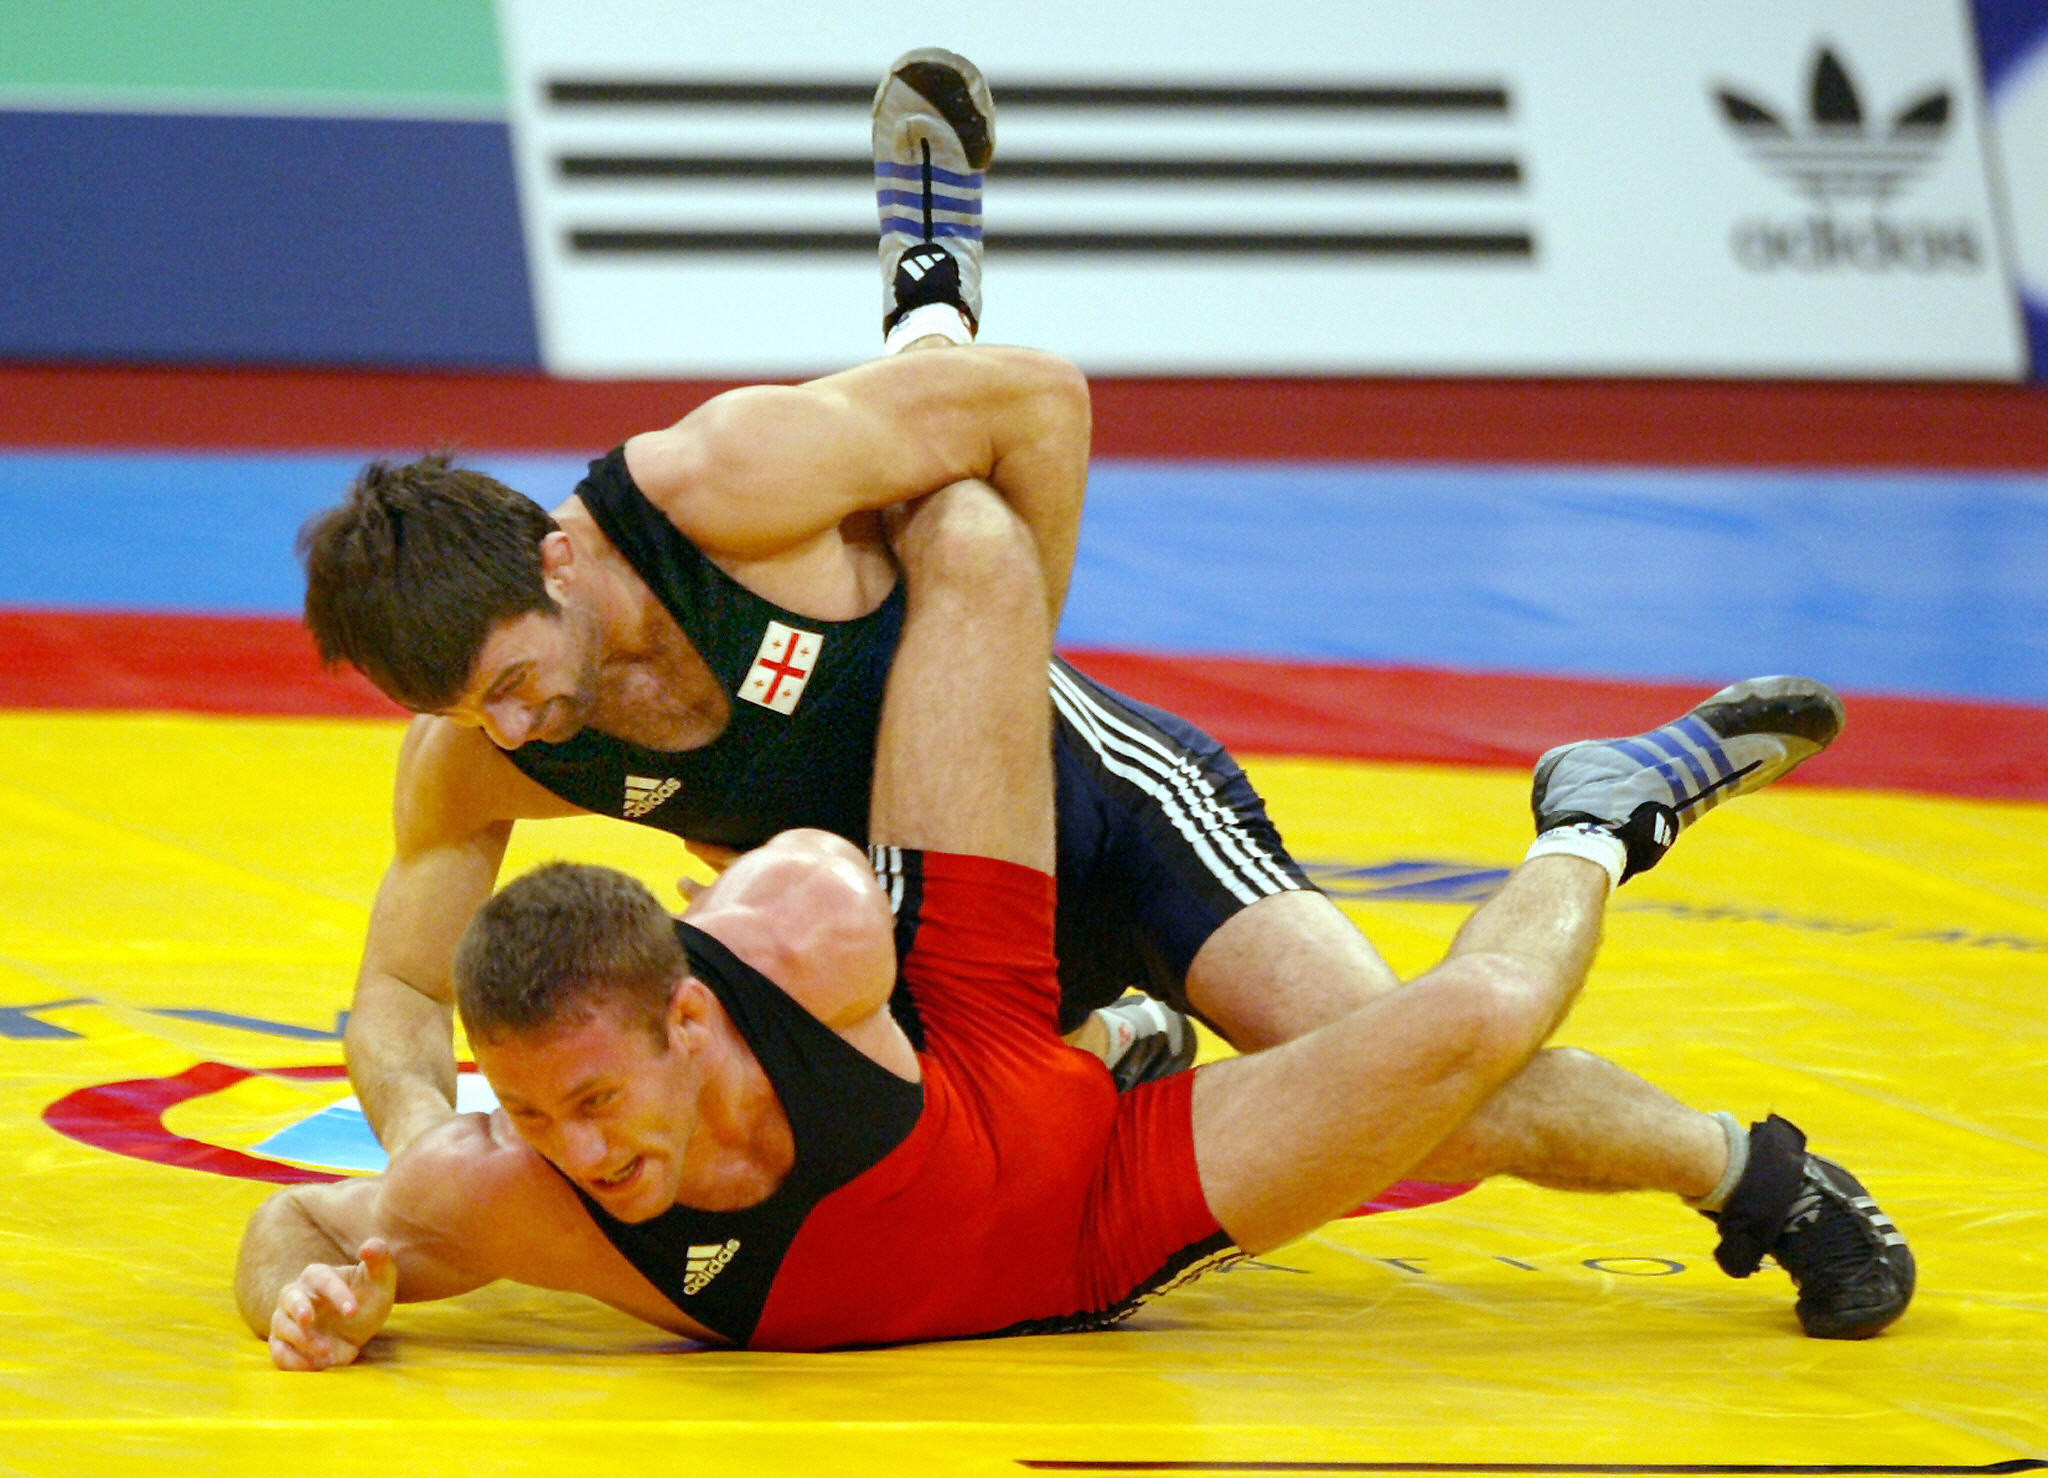 Awards presented to five retired Hungarian wrestlers as part of Republic Day celebrations at World Championships